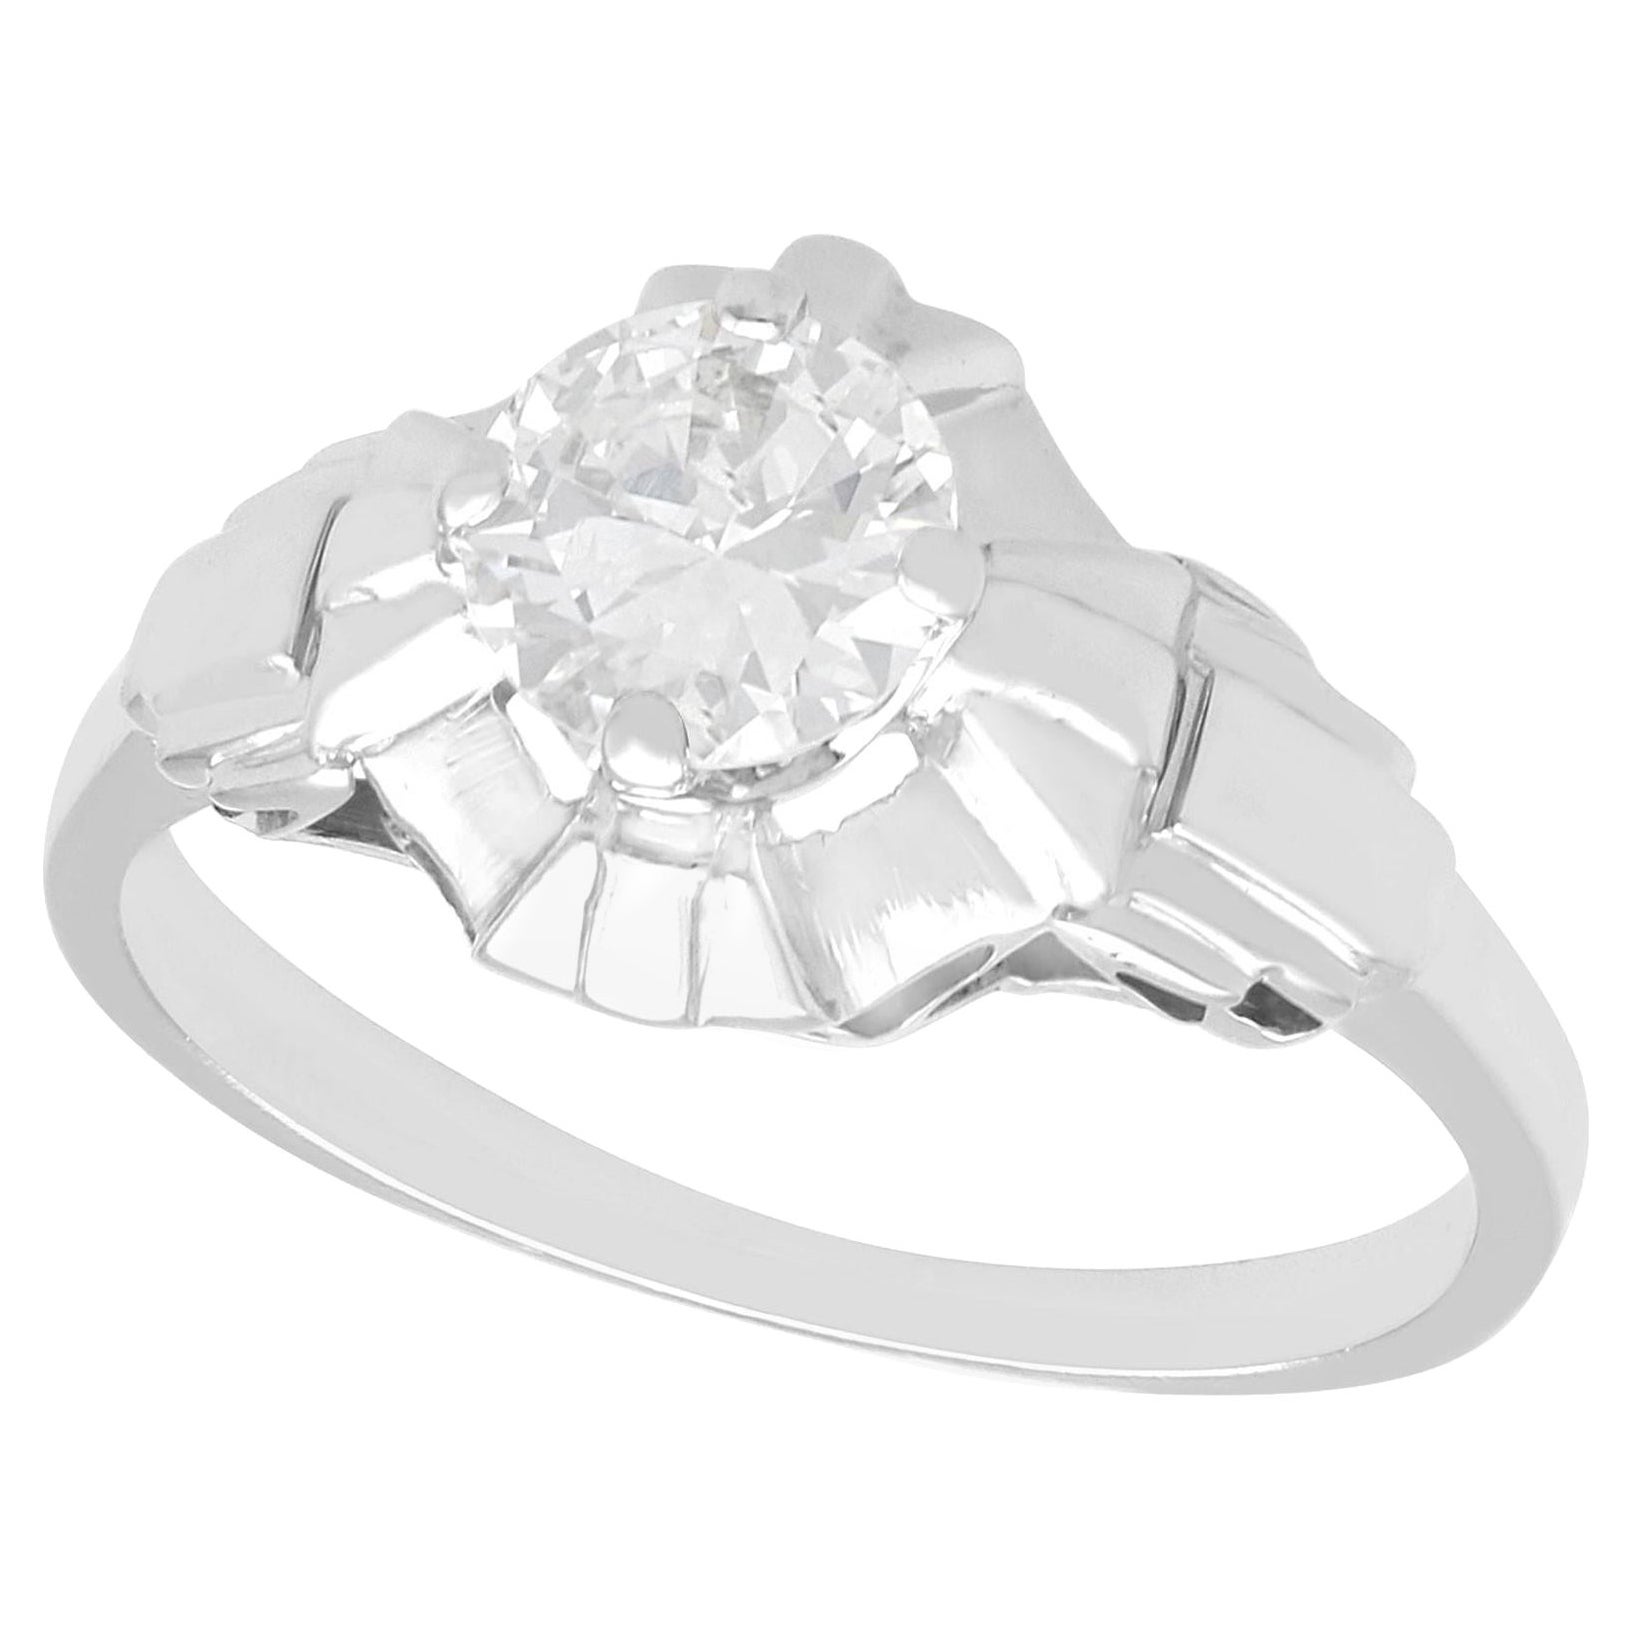 1930s Antique French 0.63 Ct Diamond and 18K White Gold Solitaire Ring For Sale